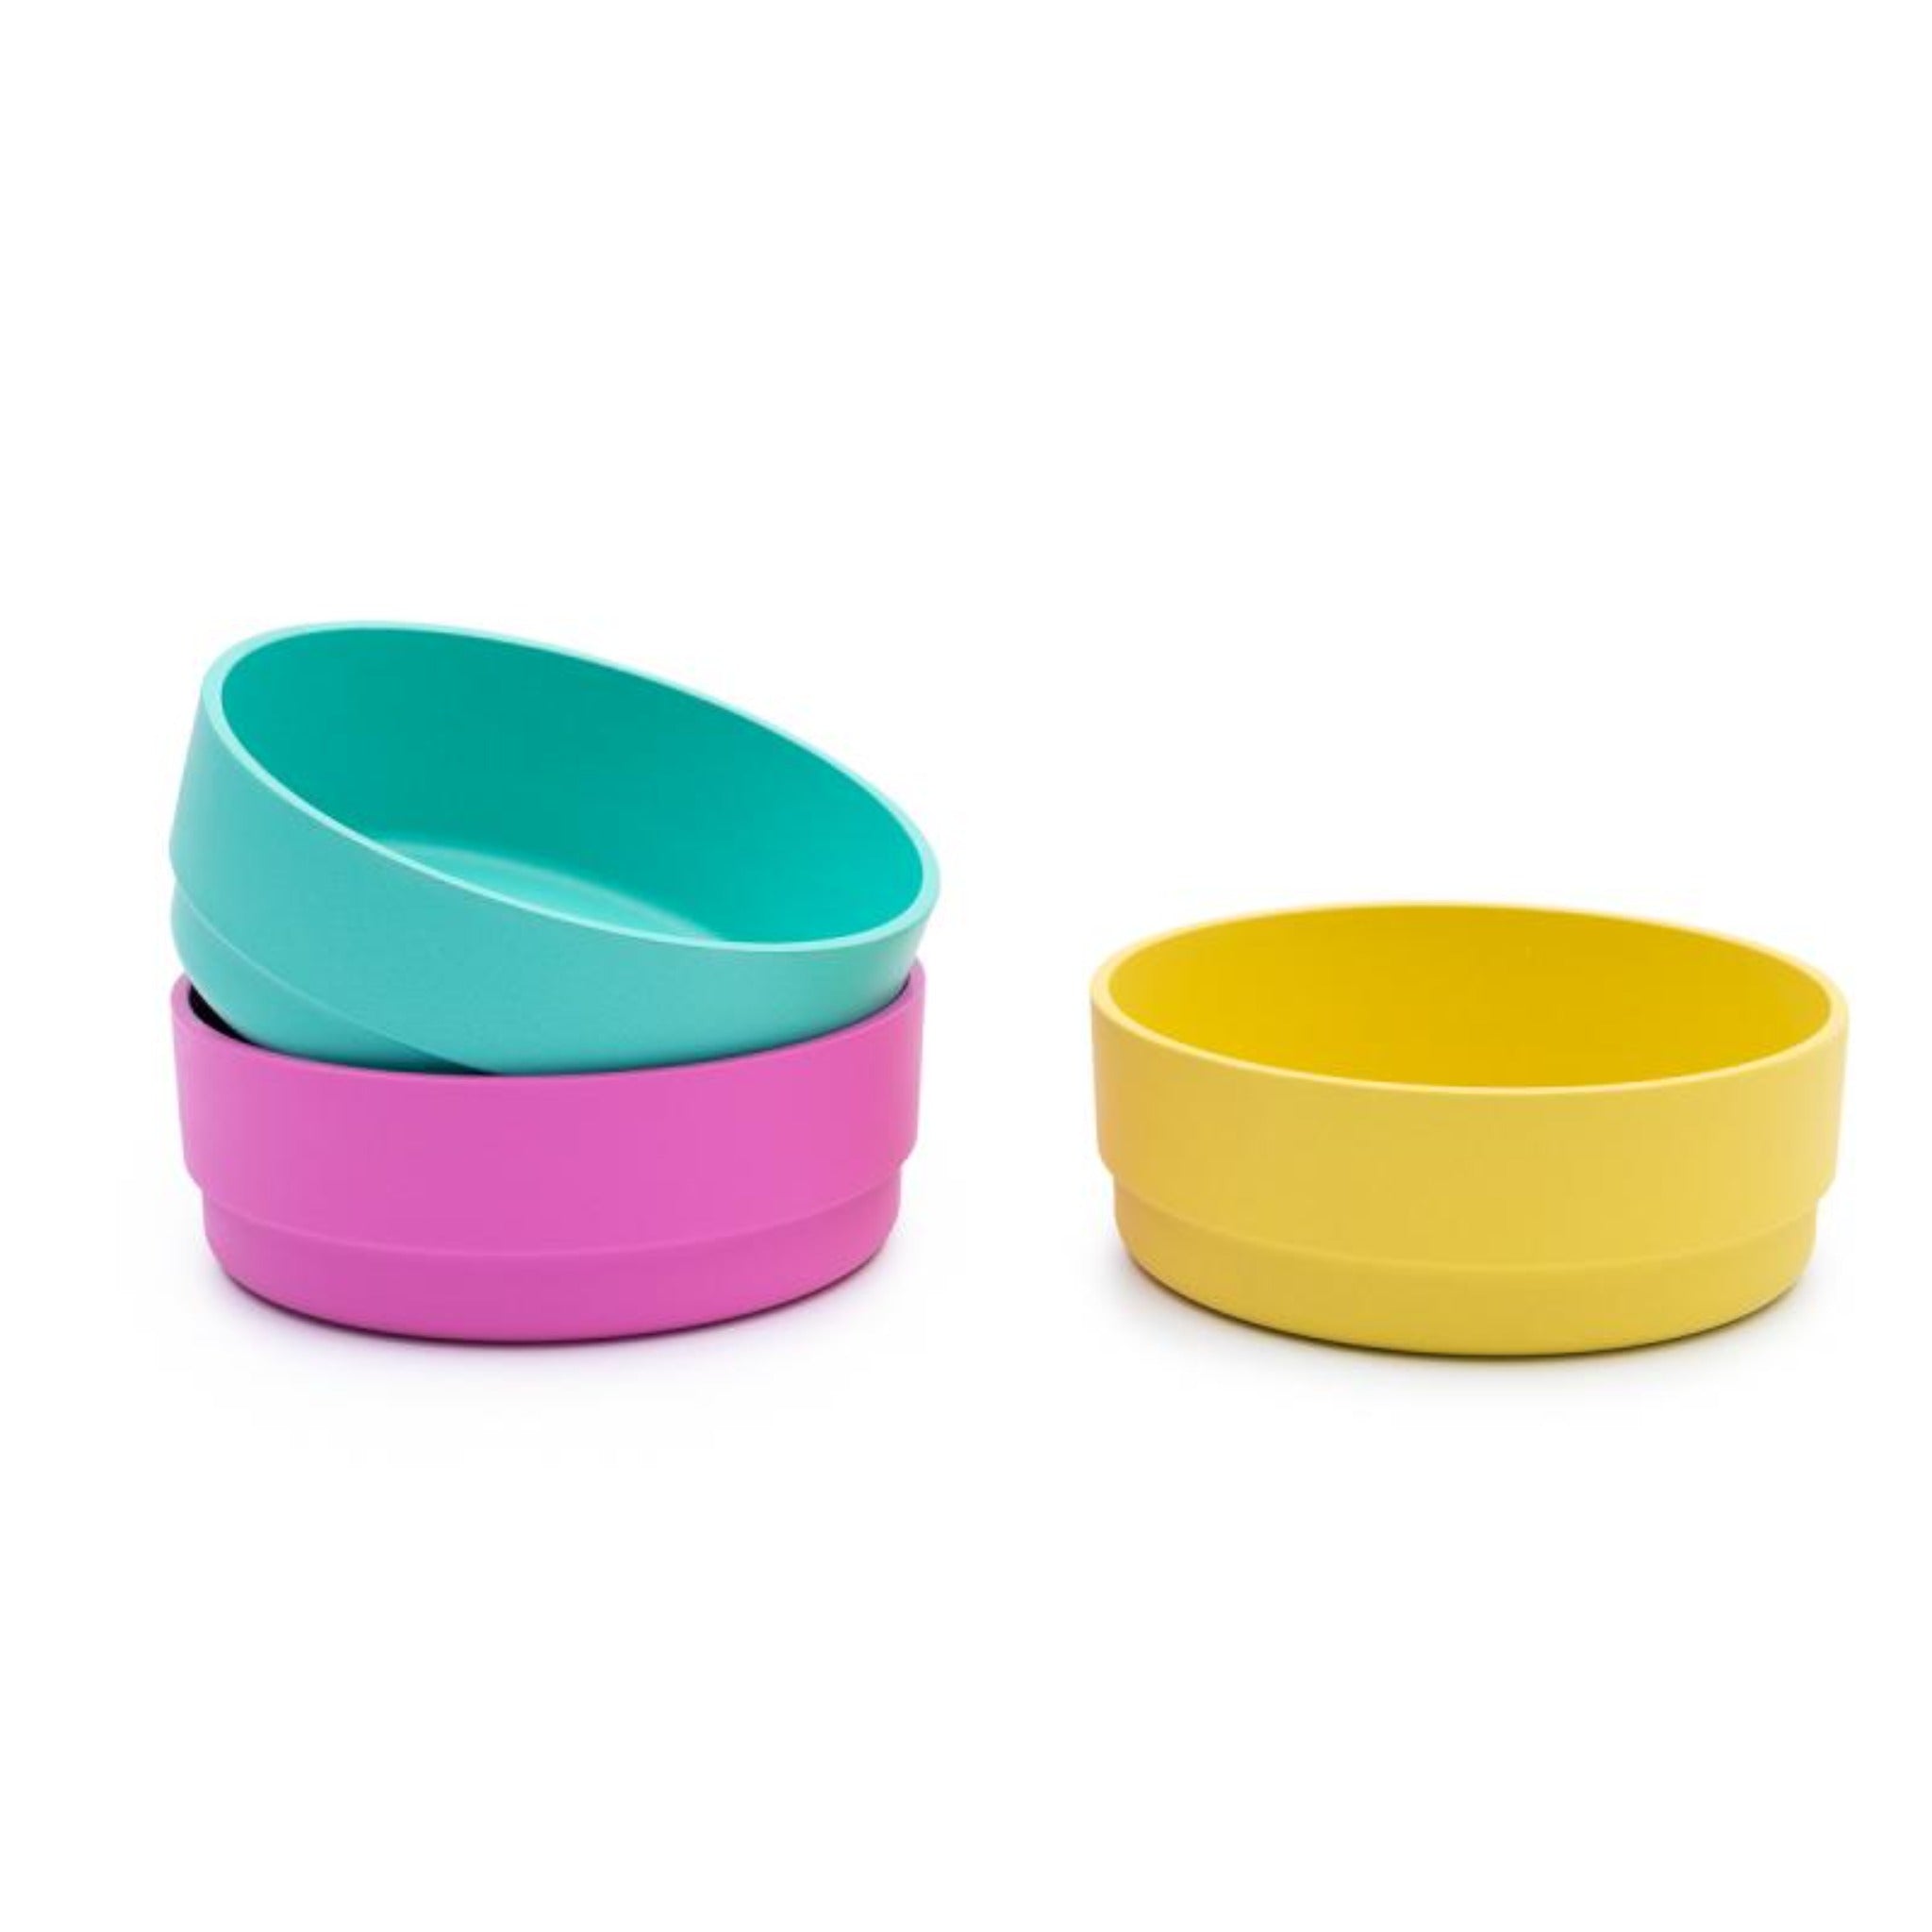 Bobo&Boo Plant-Based Colorful Kids Bowls - Dishwasher and Microwave Safe - Set of 3 - Melamine-Free and BPA Free - Baby Bowls and Toddler Dish Sets